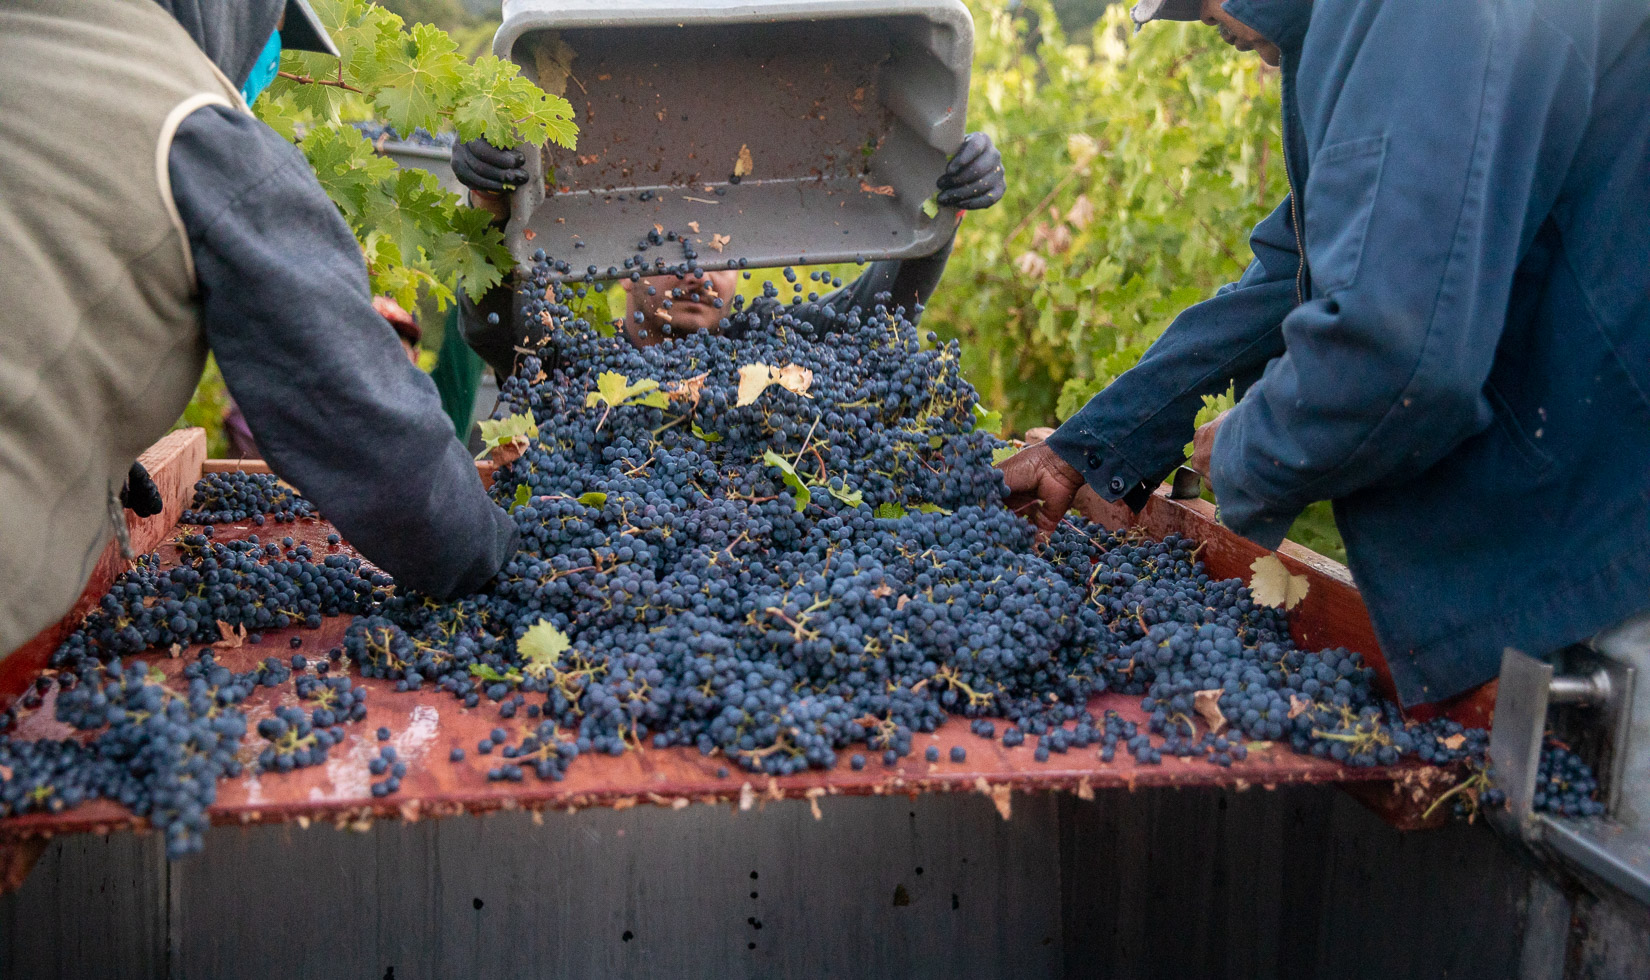 Workers collecting leaves from a freshly harvested bucket of purple cabernet sauvignon grapes as they are being poured onto the selection surface.